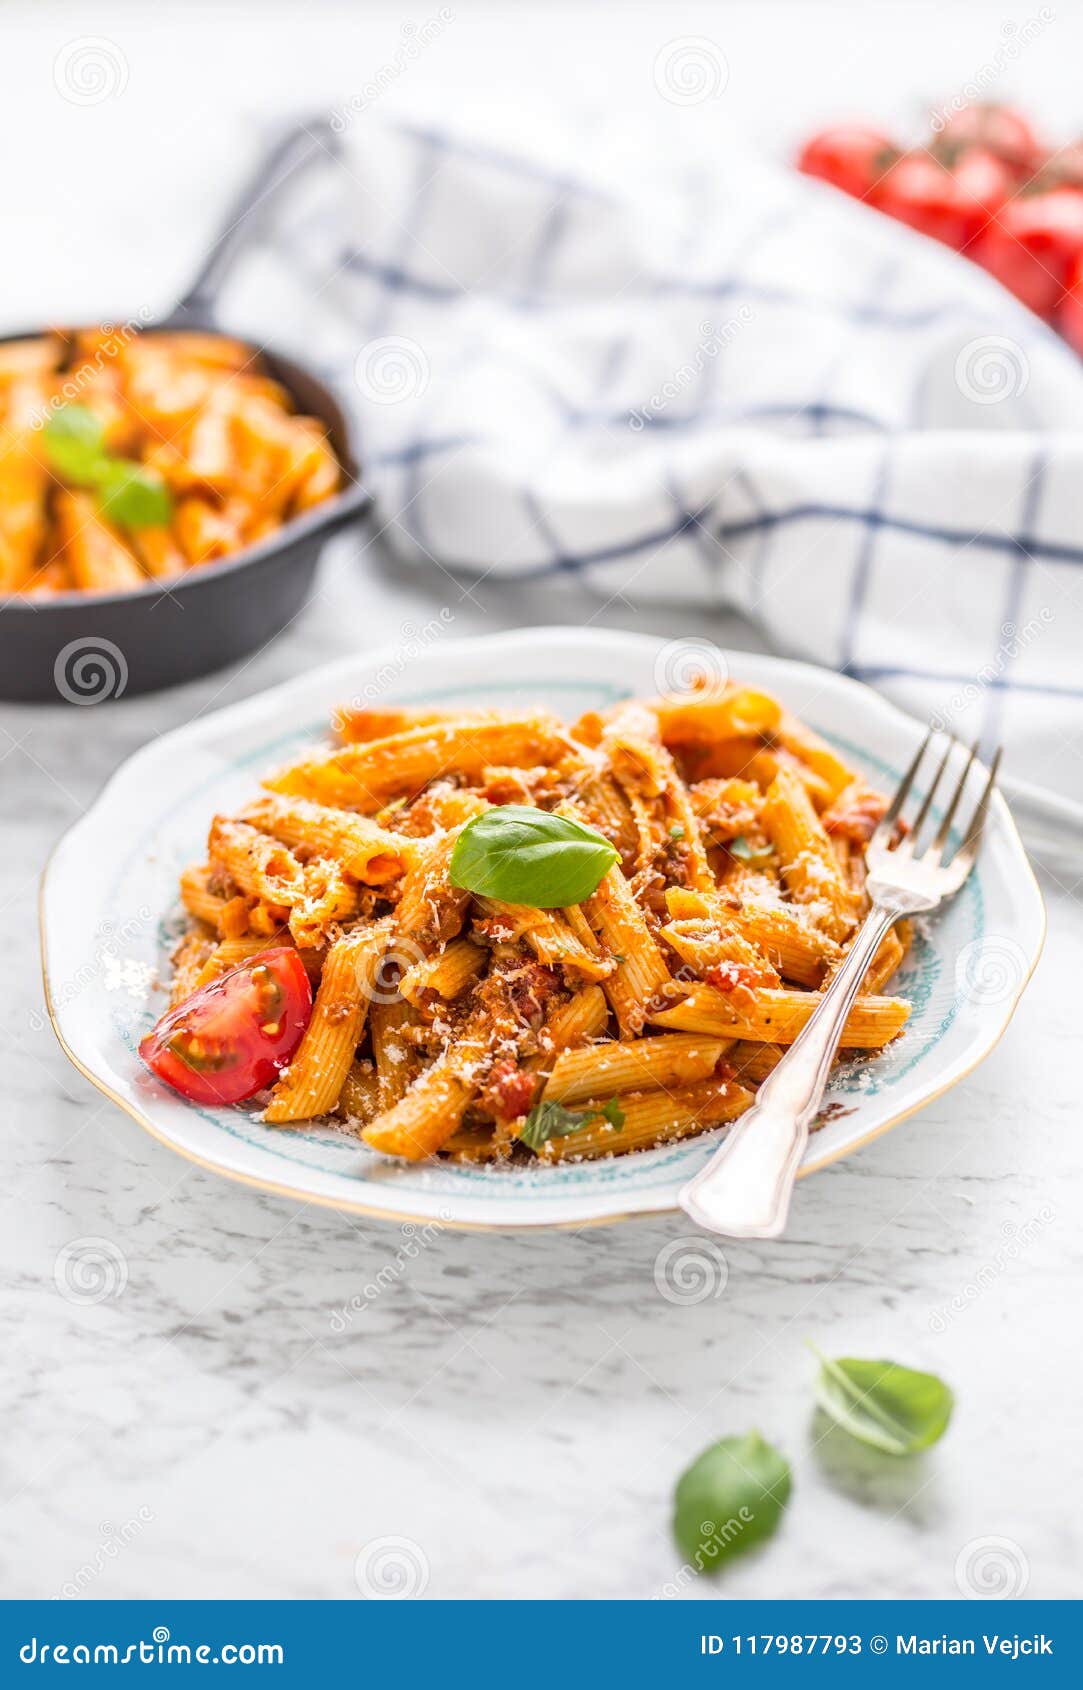 Italian Food and Pasta Pene with Bolognese Sause on Plate Stock Image ...